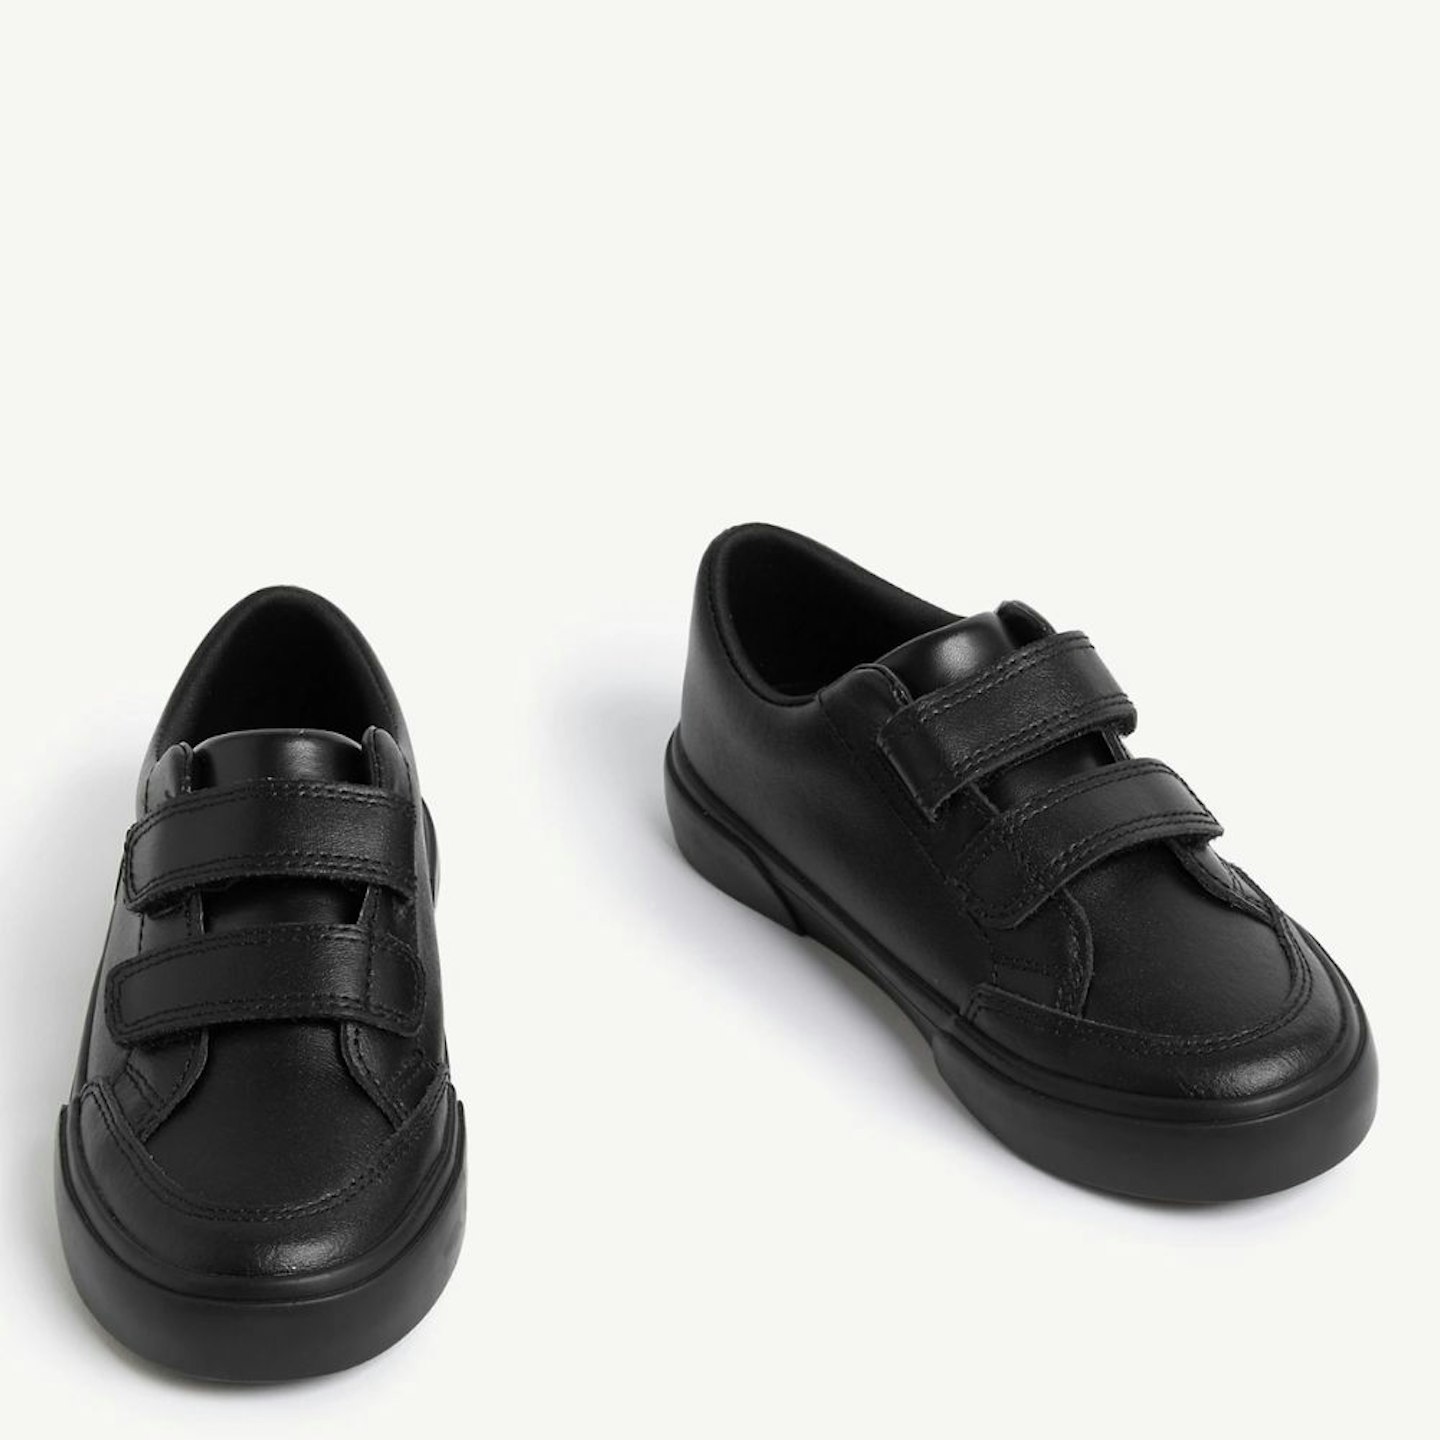 Kids' Leather Freshfeet School Shoes (8 Small - 2 Large)